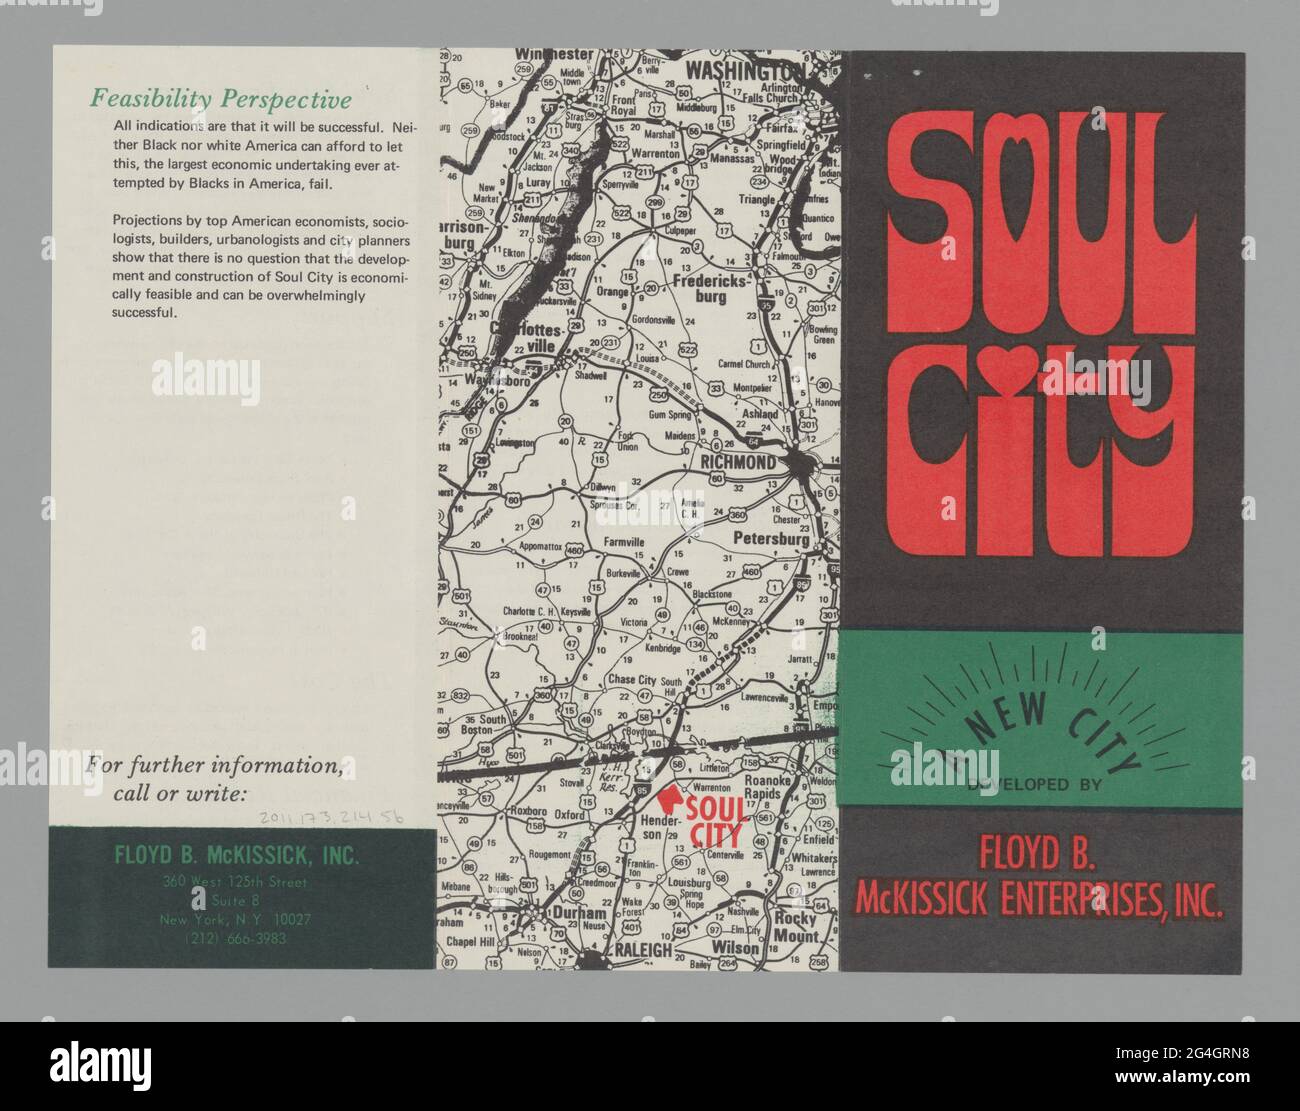 The pamphlet is black with red letters and green banner across the bottom. The words [SOUL / CITY] are in red bubble letters. The rest of the cover reads [A NEW CITY/ DEVELOPED BY / FLOYD B. / McKISSICK ENTERPRISES, INC.]. The inside of the pamphlet describes Soul City and outlines why the city is necessary and how it will operate and sustain iself. The back of the pamphlet is a black and white map showing the area from Washington, D.C. to Raleigh, North Carolina. [Soul City] is highlighted in red letters on the map just north of Raleigh. Soul City was a planned community first proposed in 196 Stock Photo